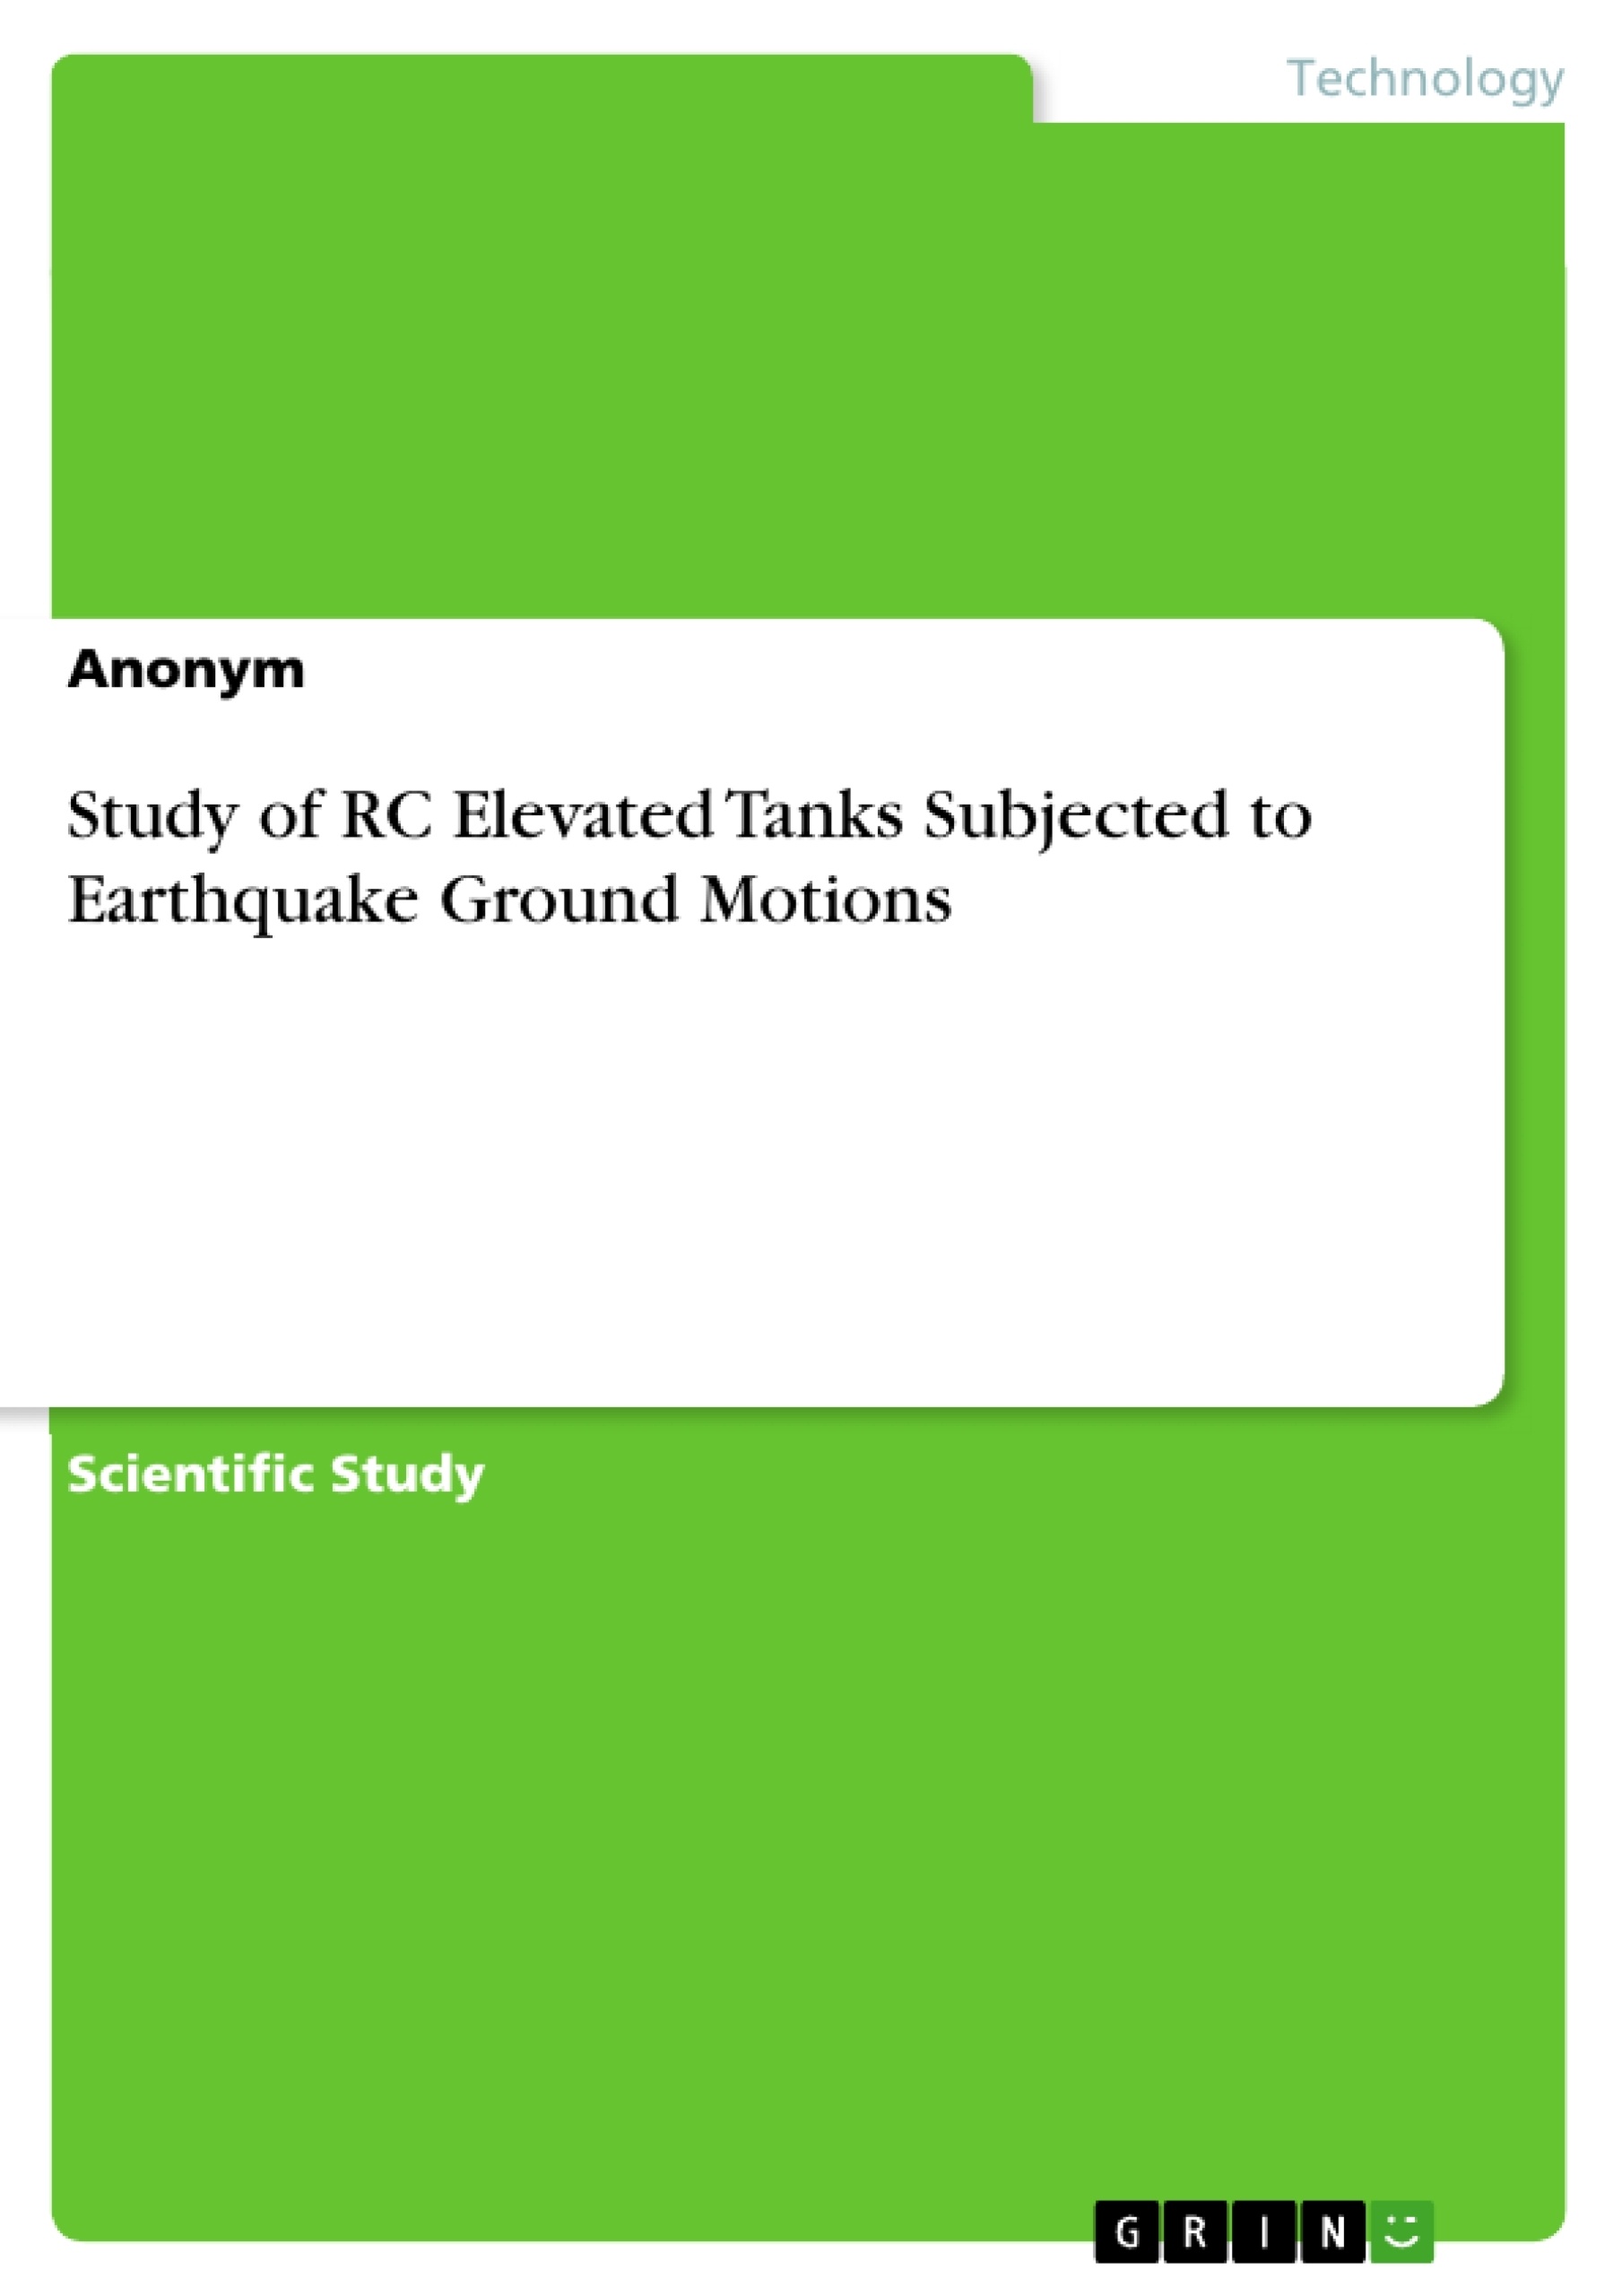 Title: Study of RC Elevated Tanks Subjected to Earthquake Ground Motions